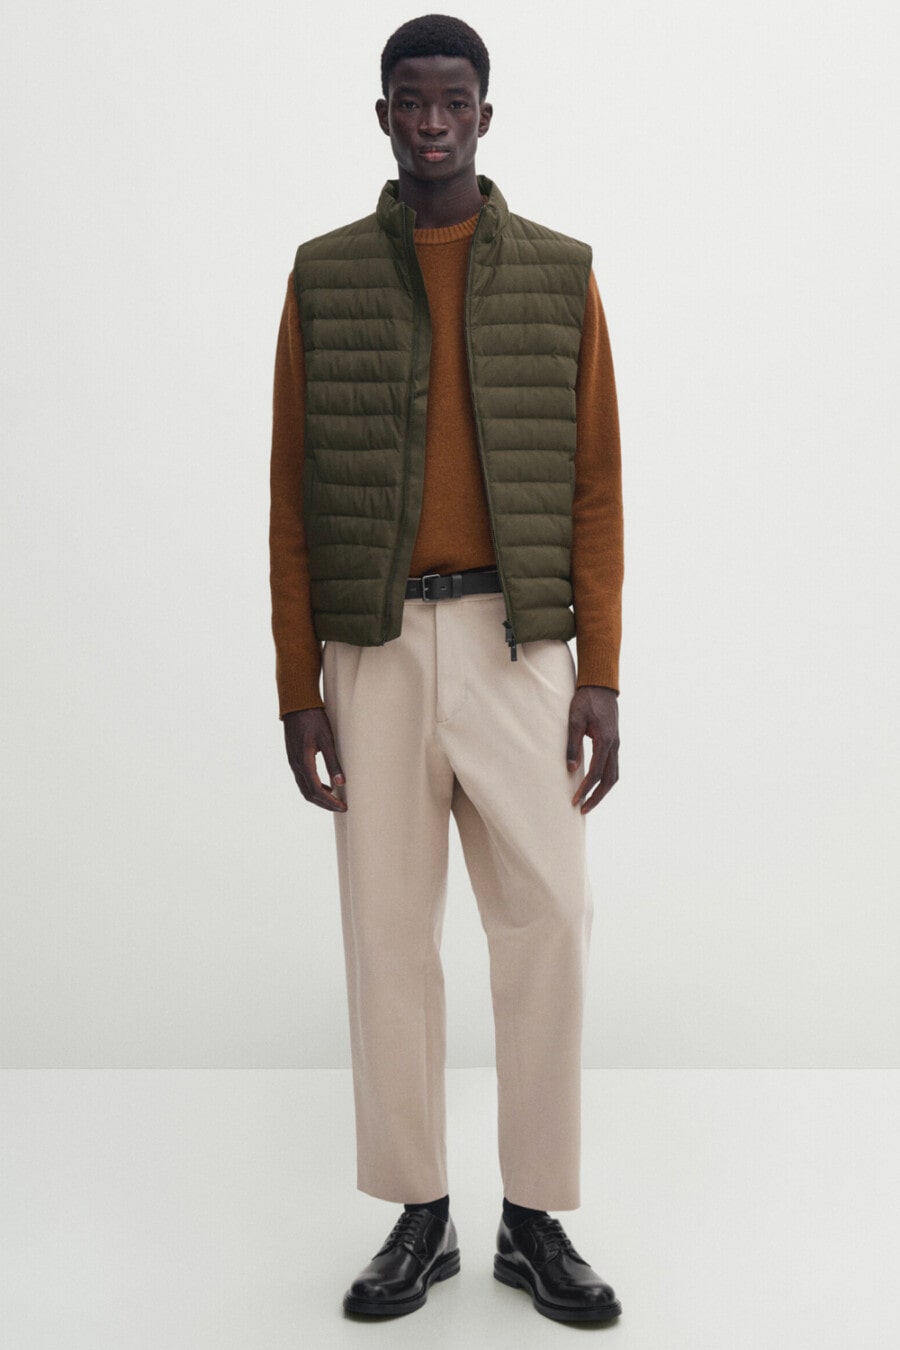 Men's wide-leg cream pants, brown long-sleeve top, green puffer vest and black leather Derby shoes outfit